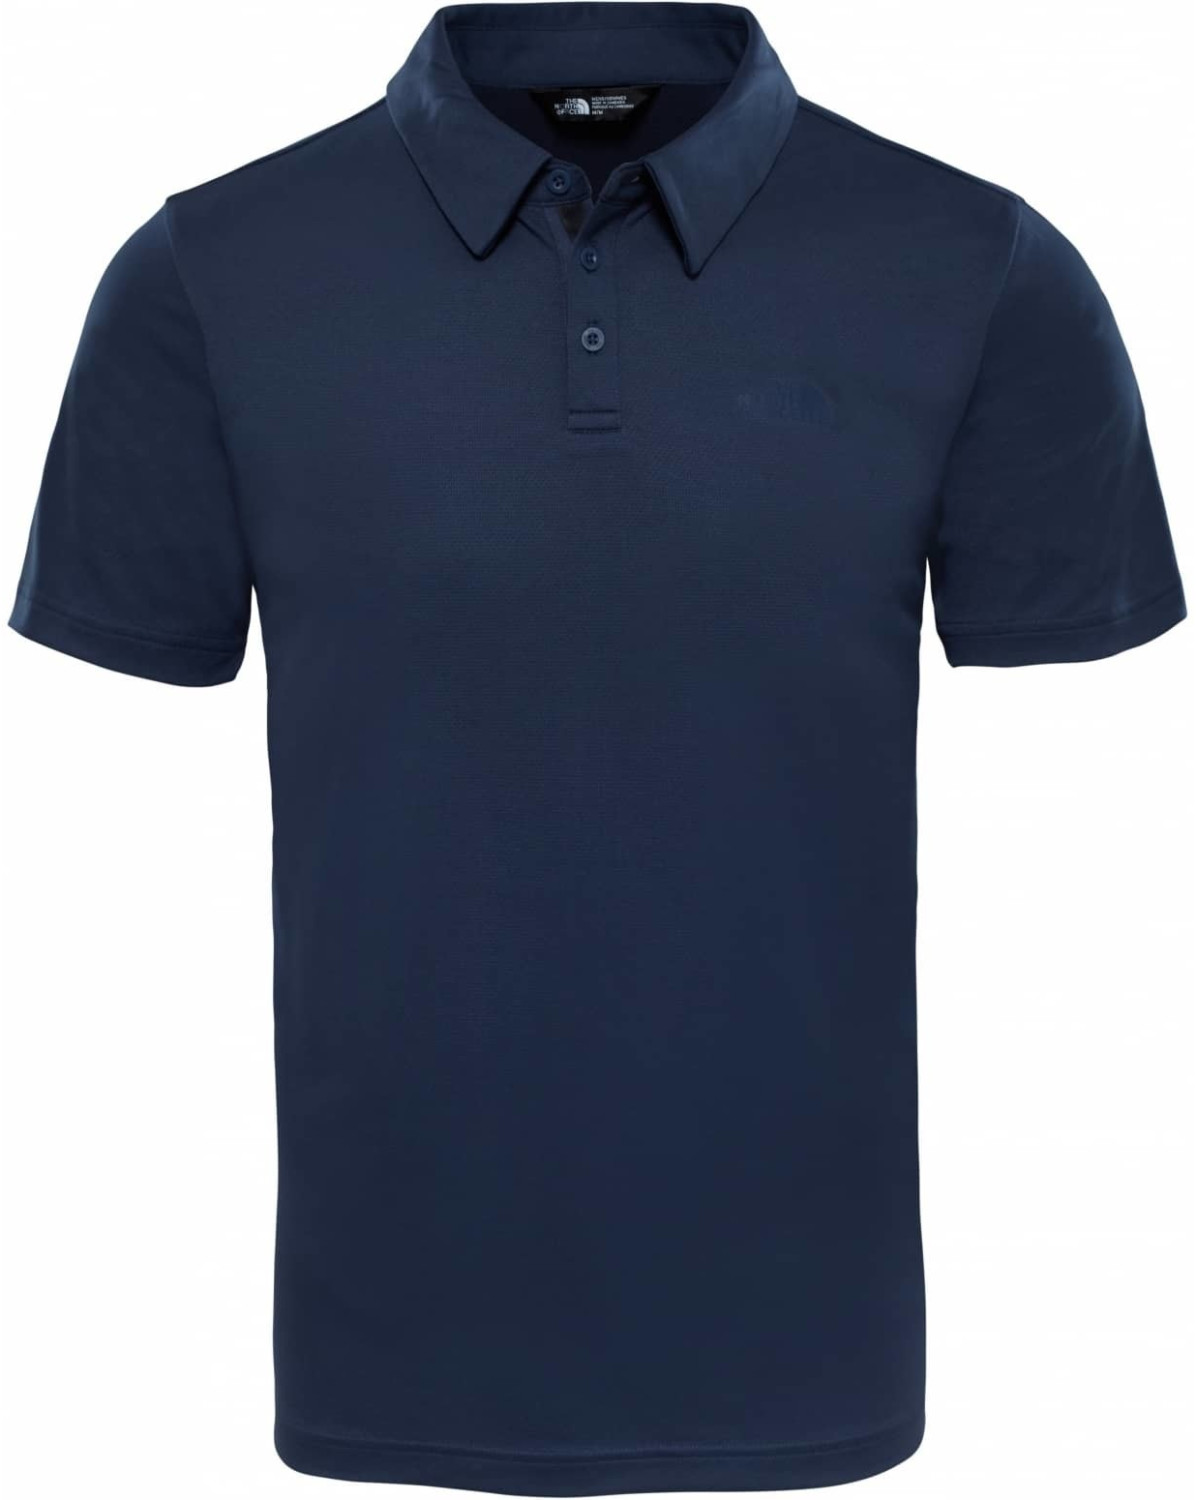 Buy The North Face Tanken Polo Shirt urban navy from £24.47 (Today ...